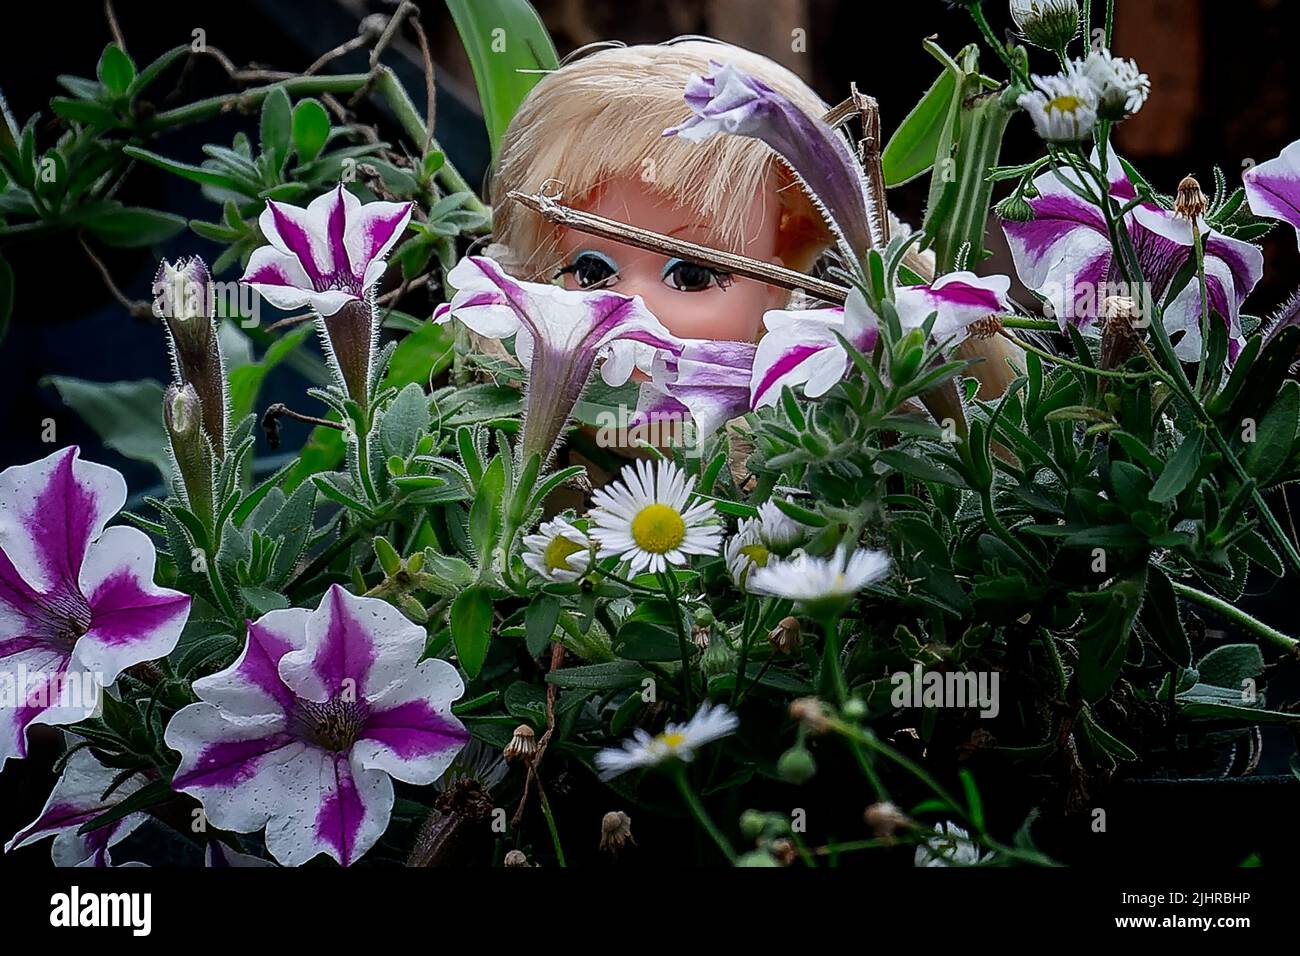 Mysterious figure in the garden Stock Photo